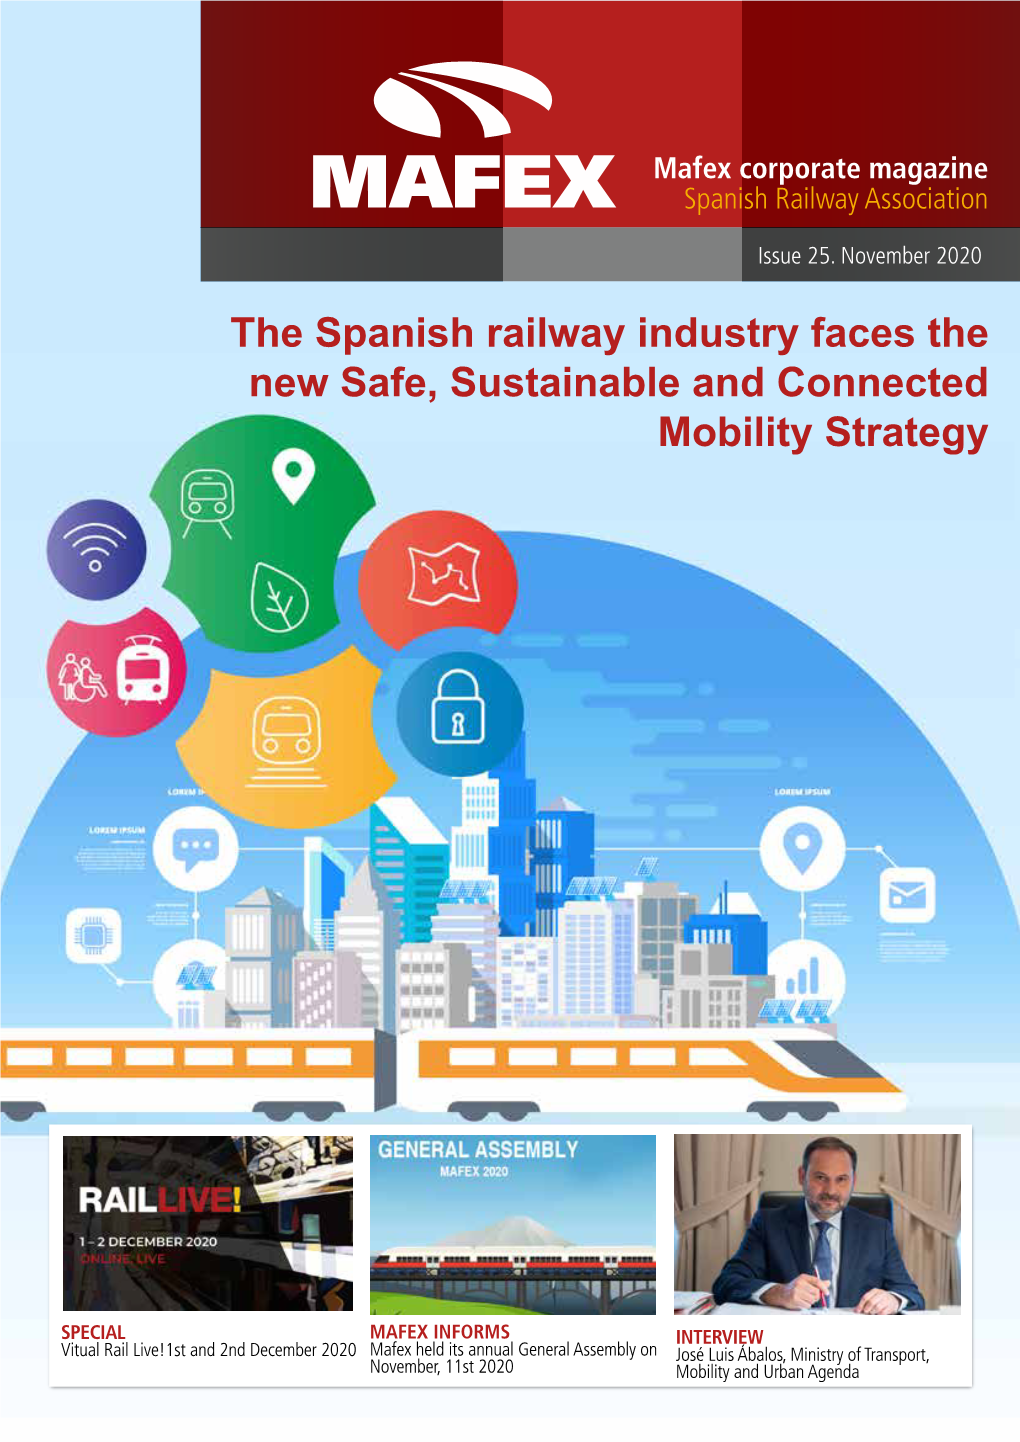 The Spanish Railway Industry Faces the New Safe, Sustainable and Connected Mobility Strategy